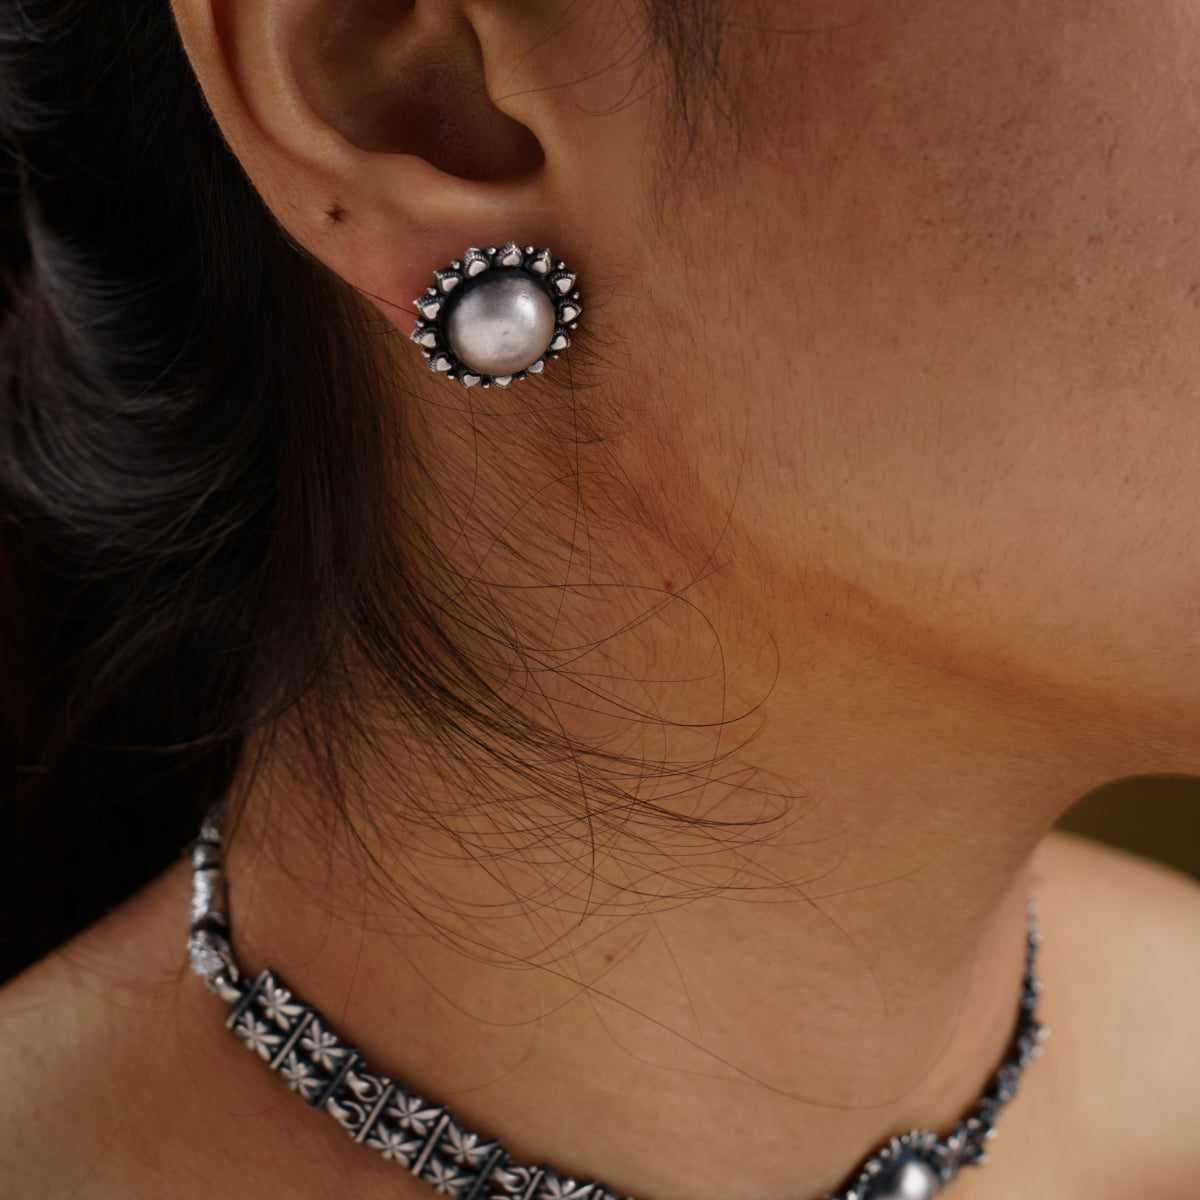 a close up of a person wearing a necklace and earrings